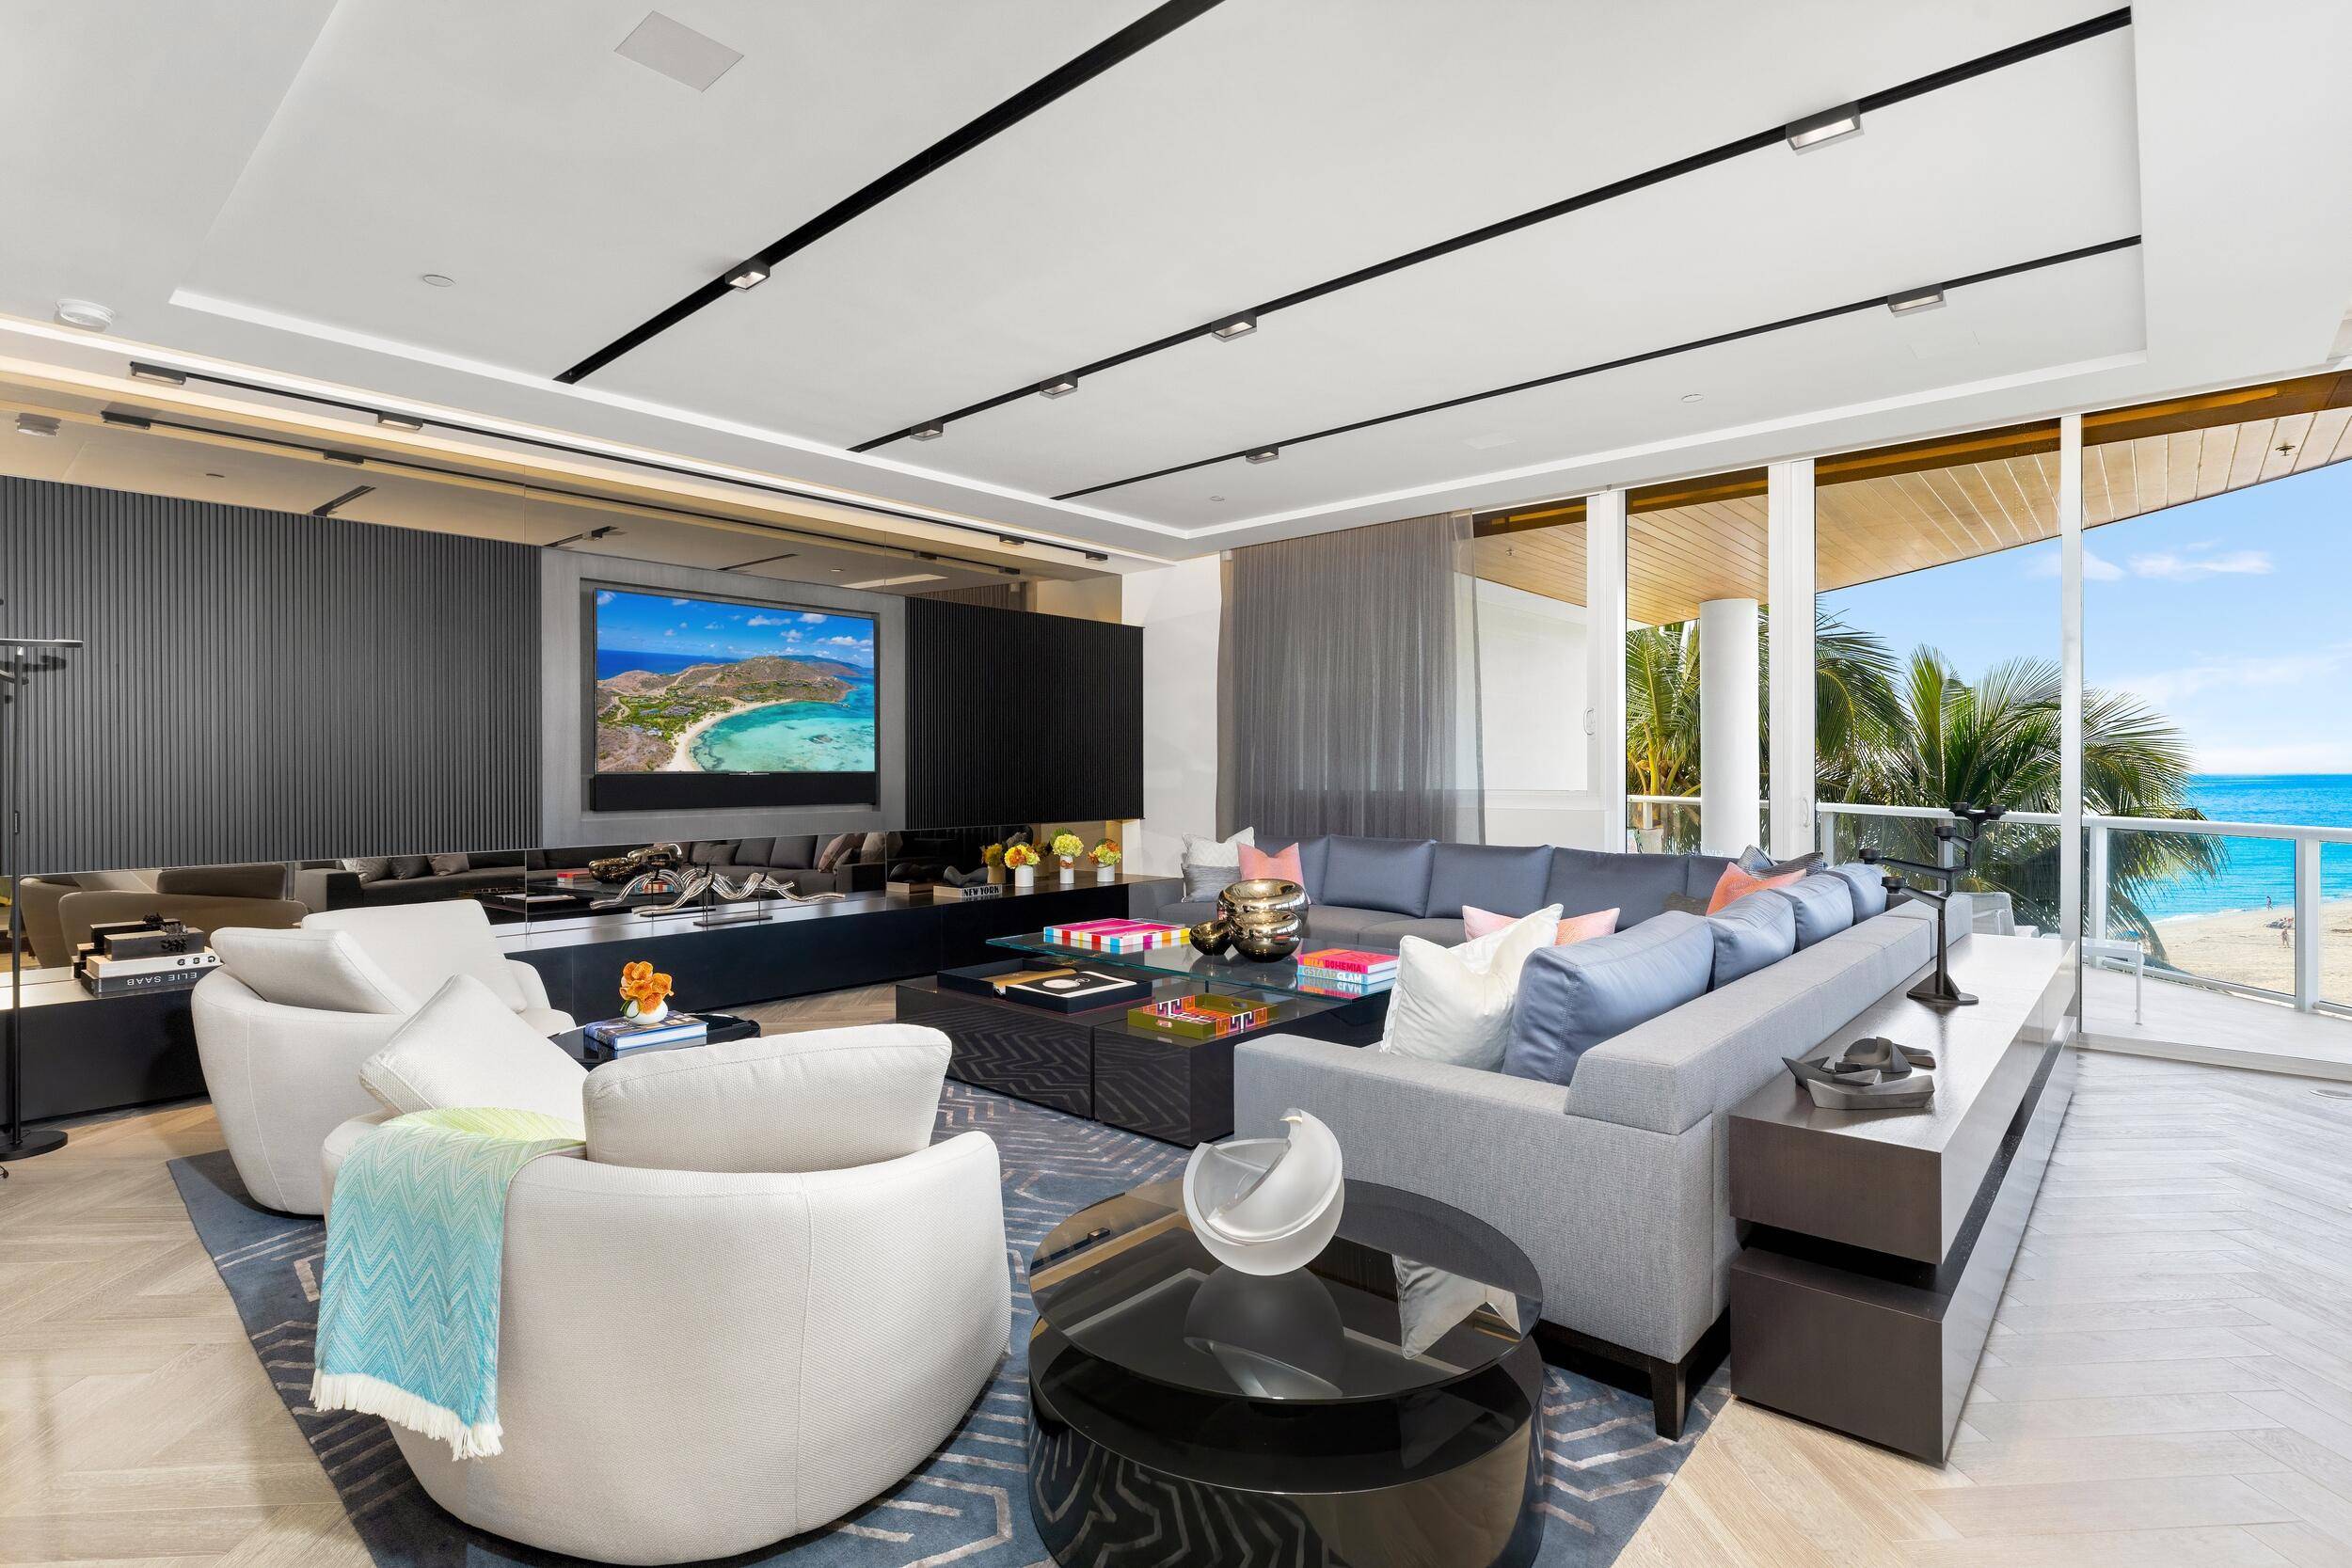 One Thousand Ocean 301 stands as a bespoke contemporary masterpiece that is undoubtedly one of the finest condominiums in Boca Raton.